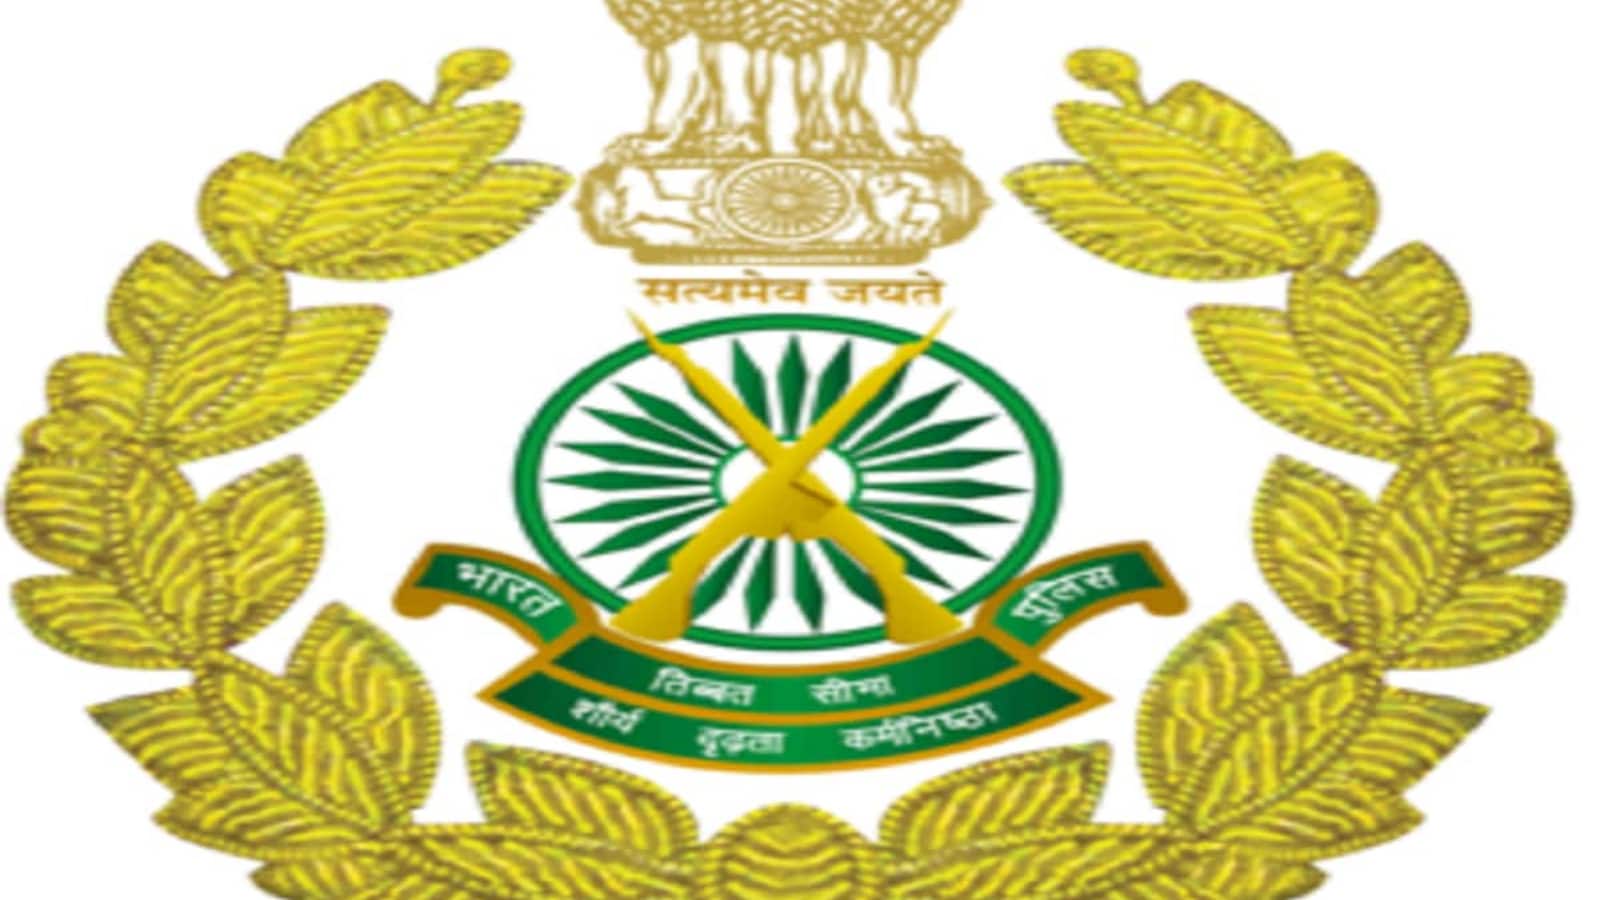 ITBP to recruit 24 Assistant SI posts, apply at recruitment.itbpolice.nic.in